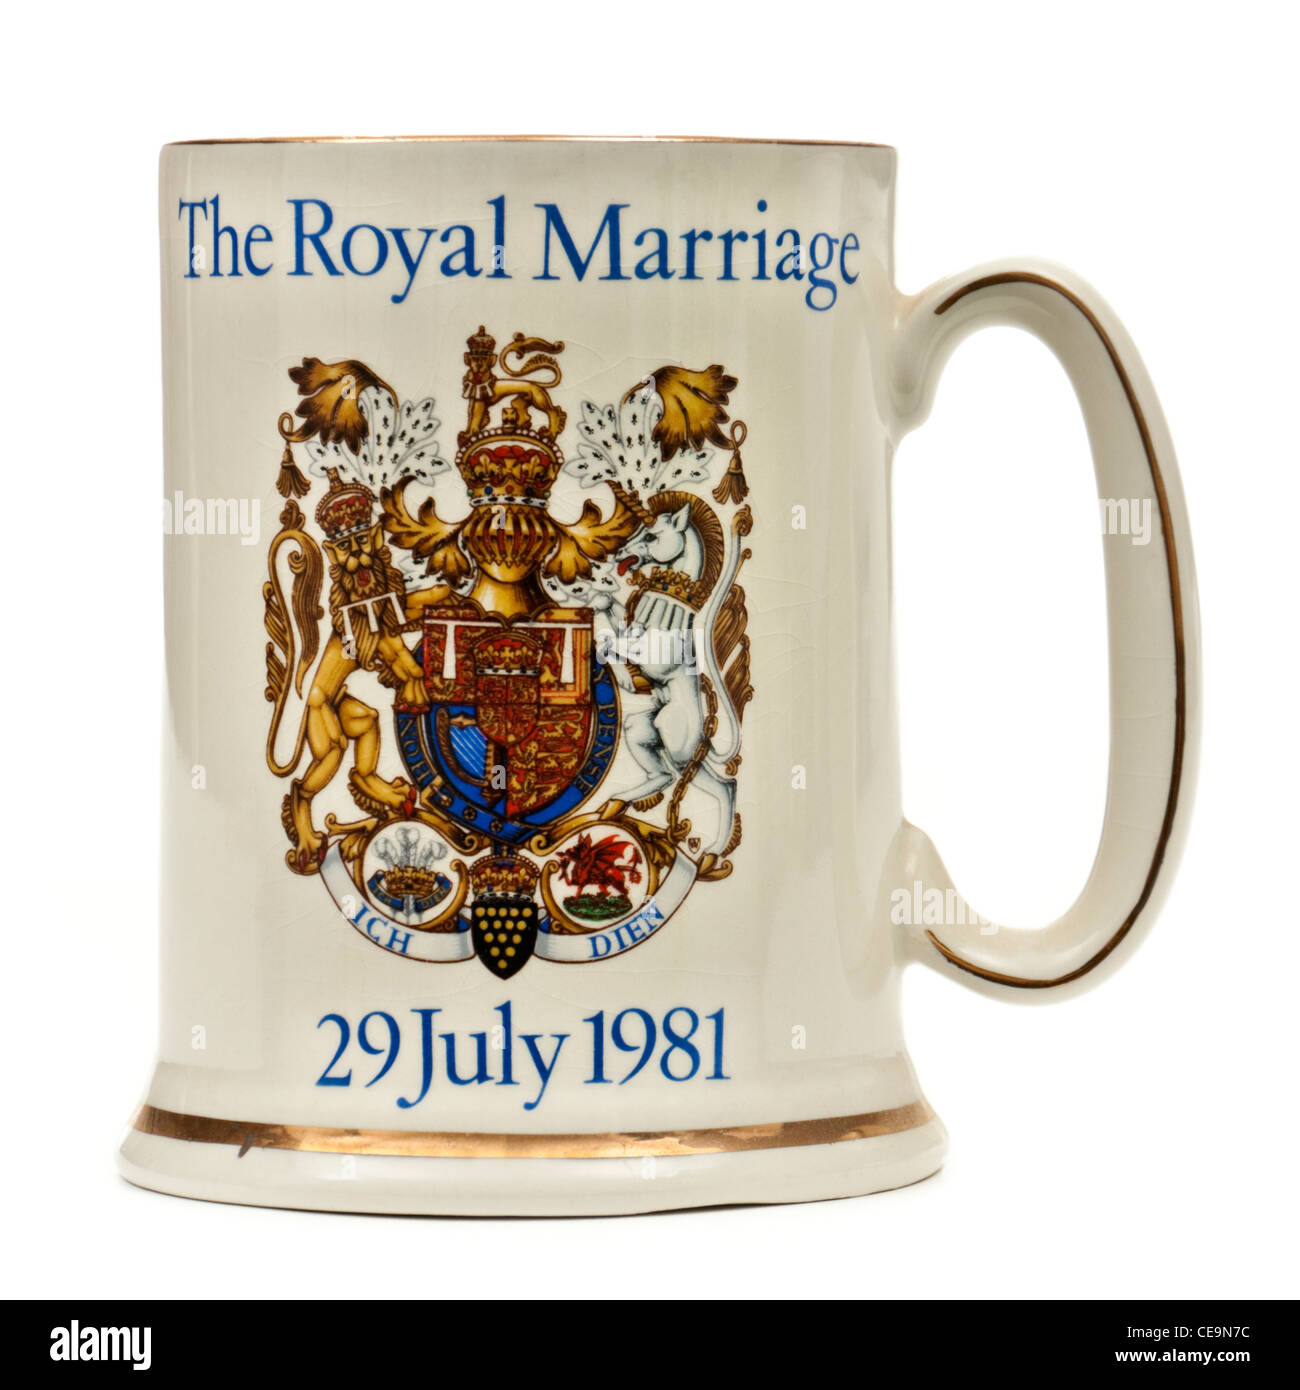 1981 vintage tankard by Wood & Sons commemorating the Royal Wedding of Prince Charles & Lady Diana Spencer on 29th July 1981 Stock Photo